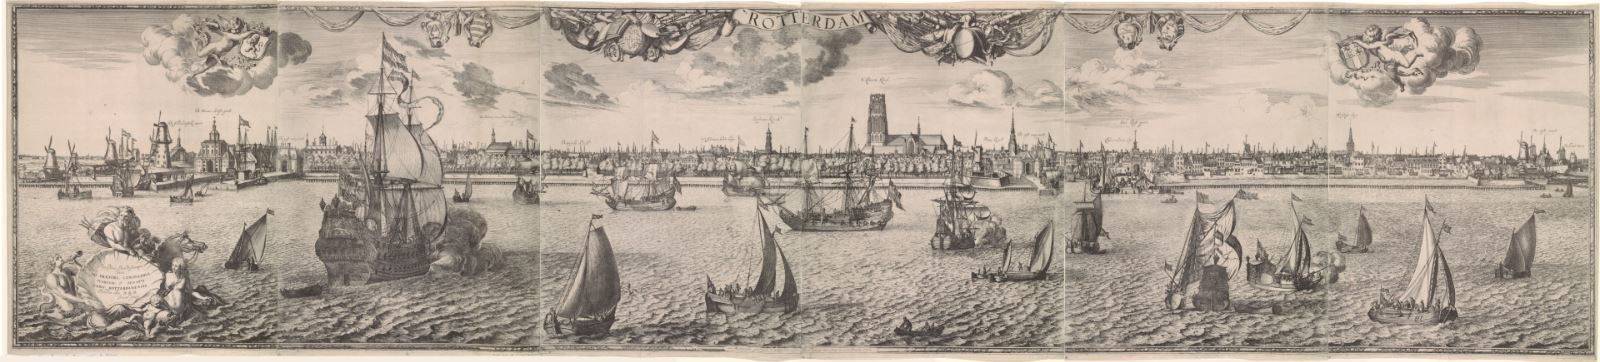 Joost van Geel (Published by Jacob Quack), Panoramic view of Rotterdam, “1665” [=not before 1675]. 